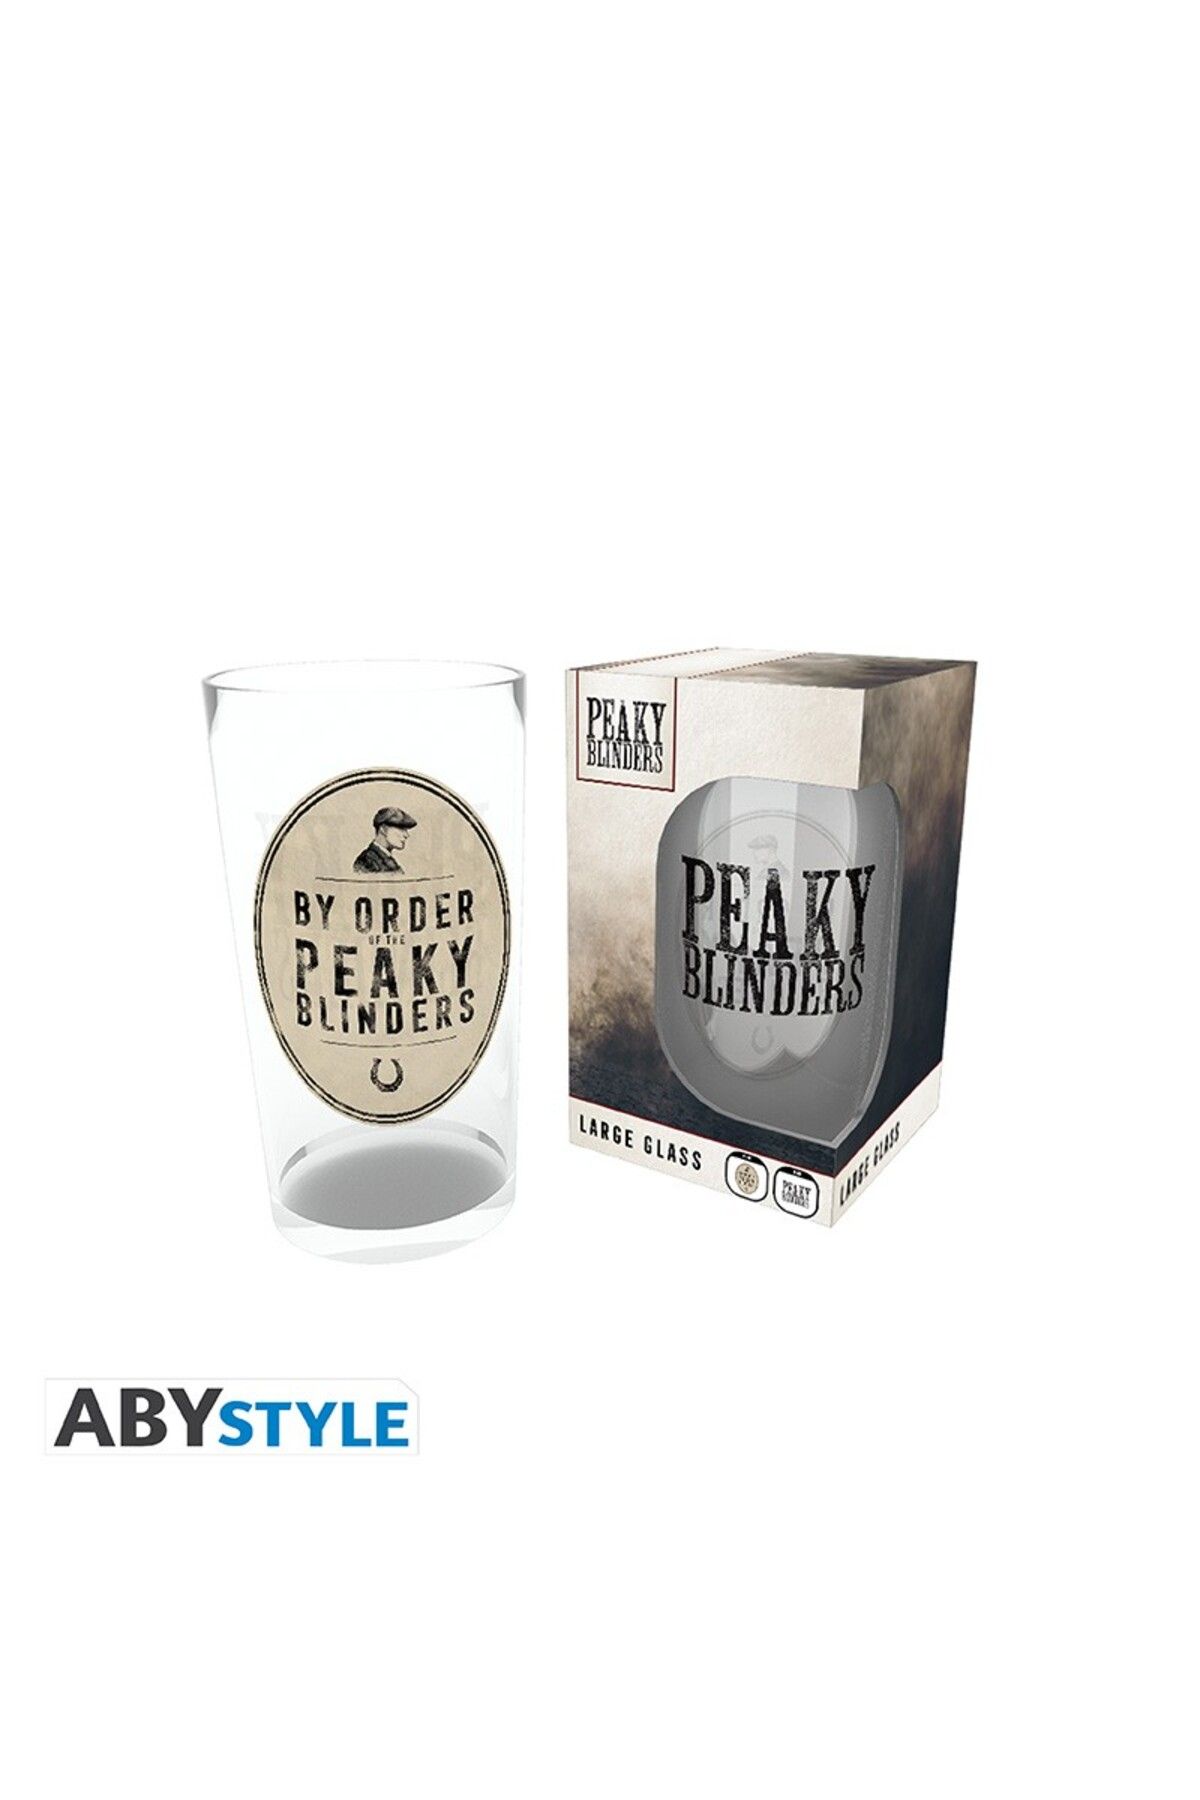 ABYstyle PEAKY BLINDERS Large Glass The Order's Stamp-GLB0180 Kupa